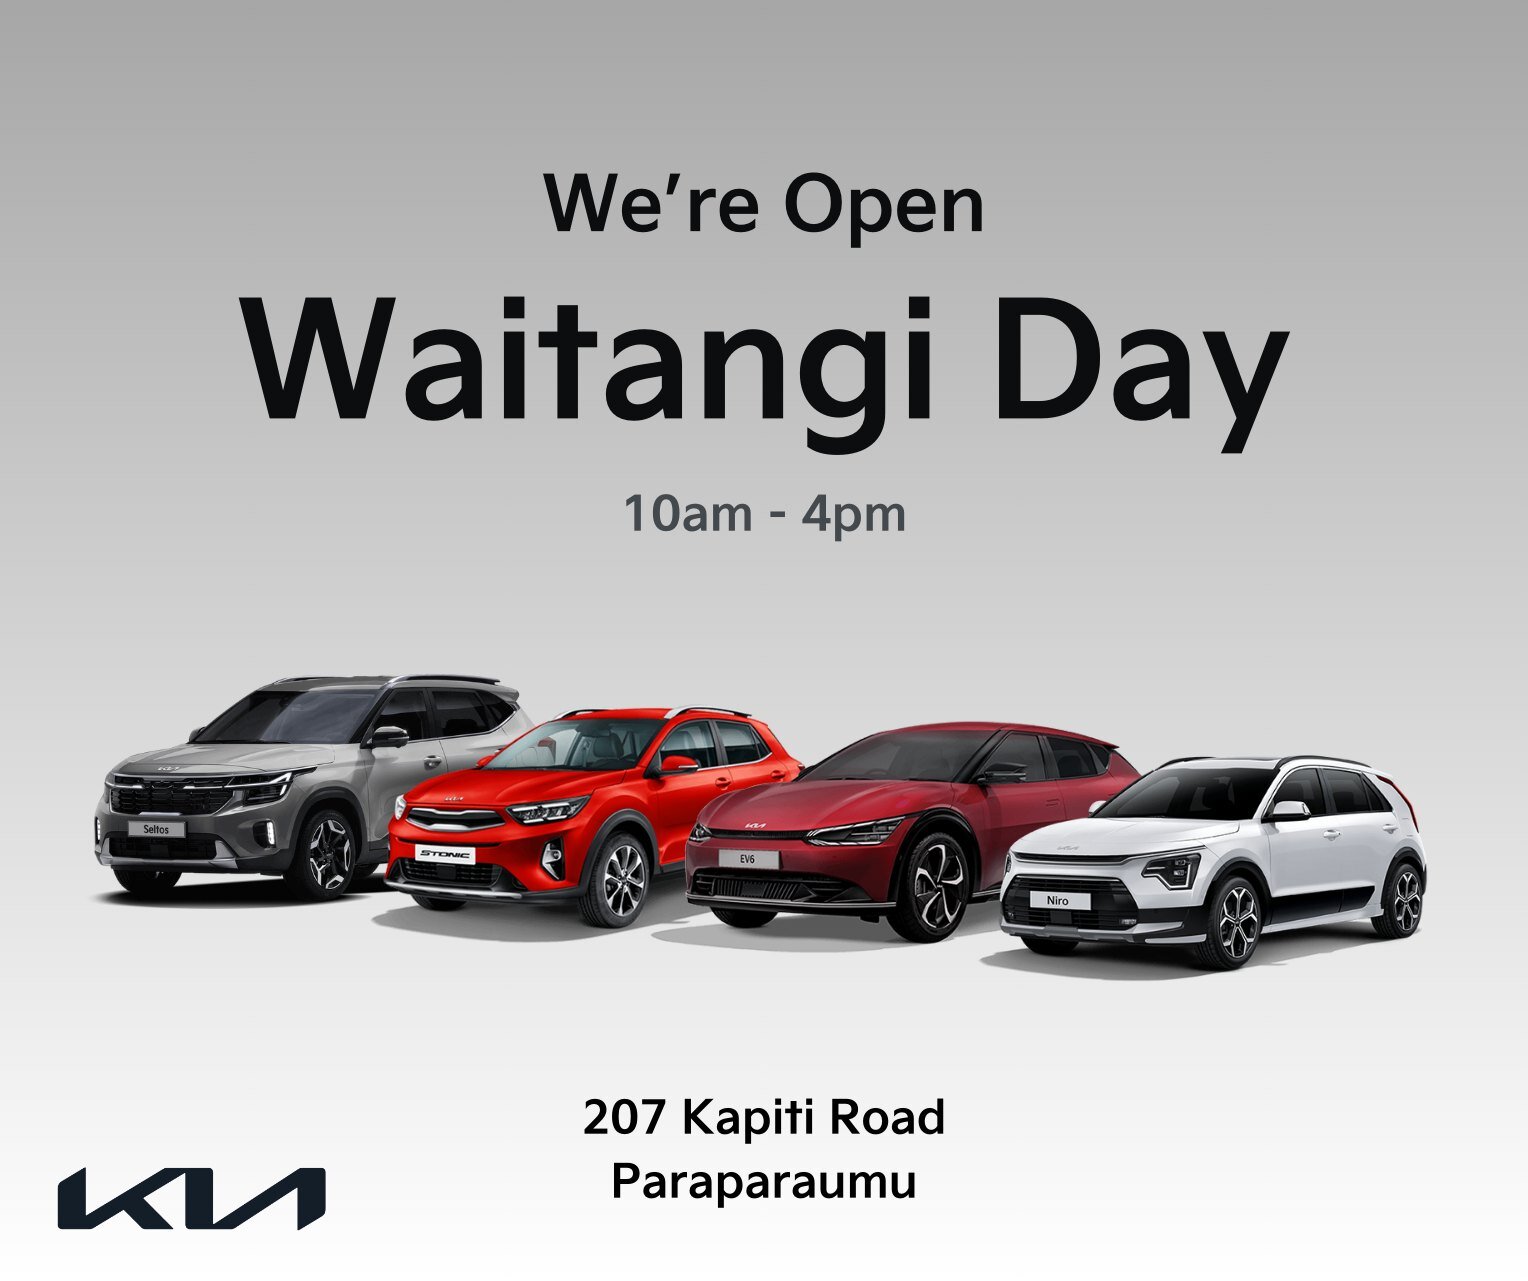 🎉 Celebrate Waitangi Day with Kapiti Kia! 🚗

Our doors are wide open, and while our sales department takes the spotlight, we've got a fantastic lineup of brand-new Kia models and a diverse range of pre-loved vehicles waiting for you to explore.

🌟